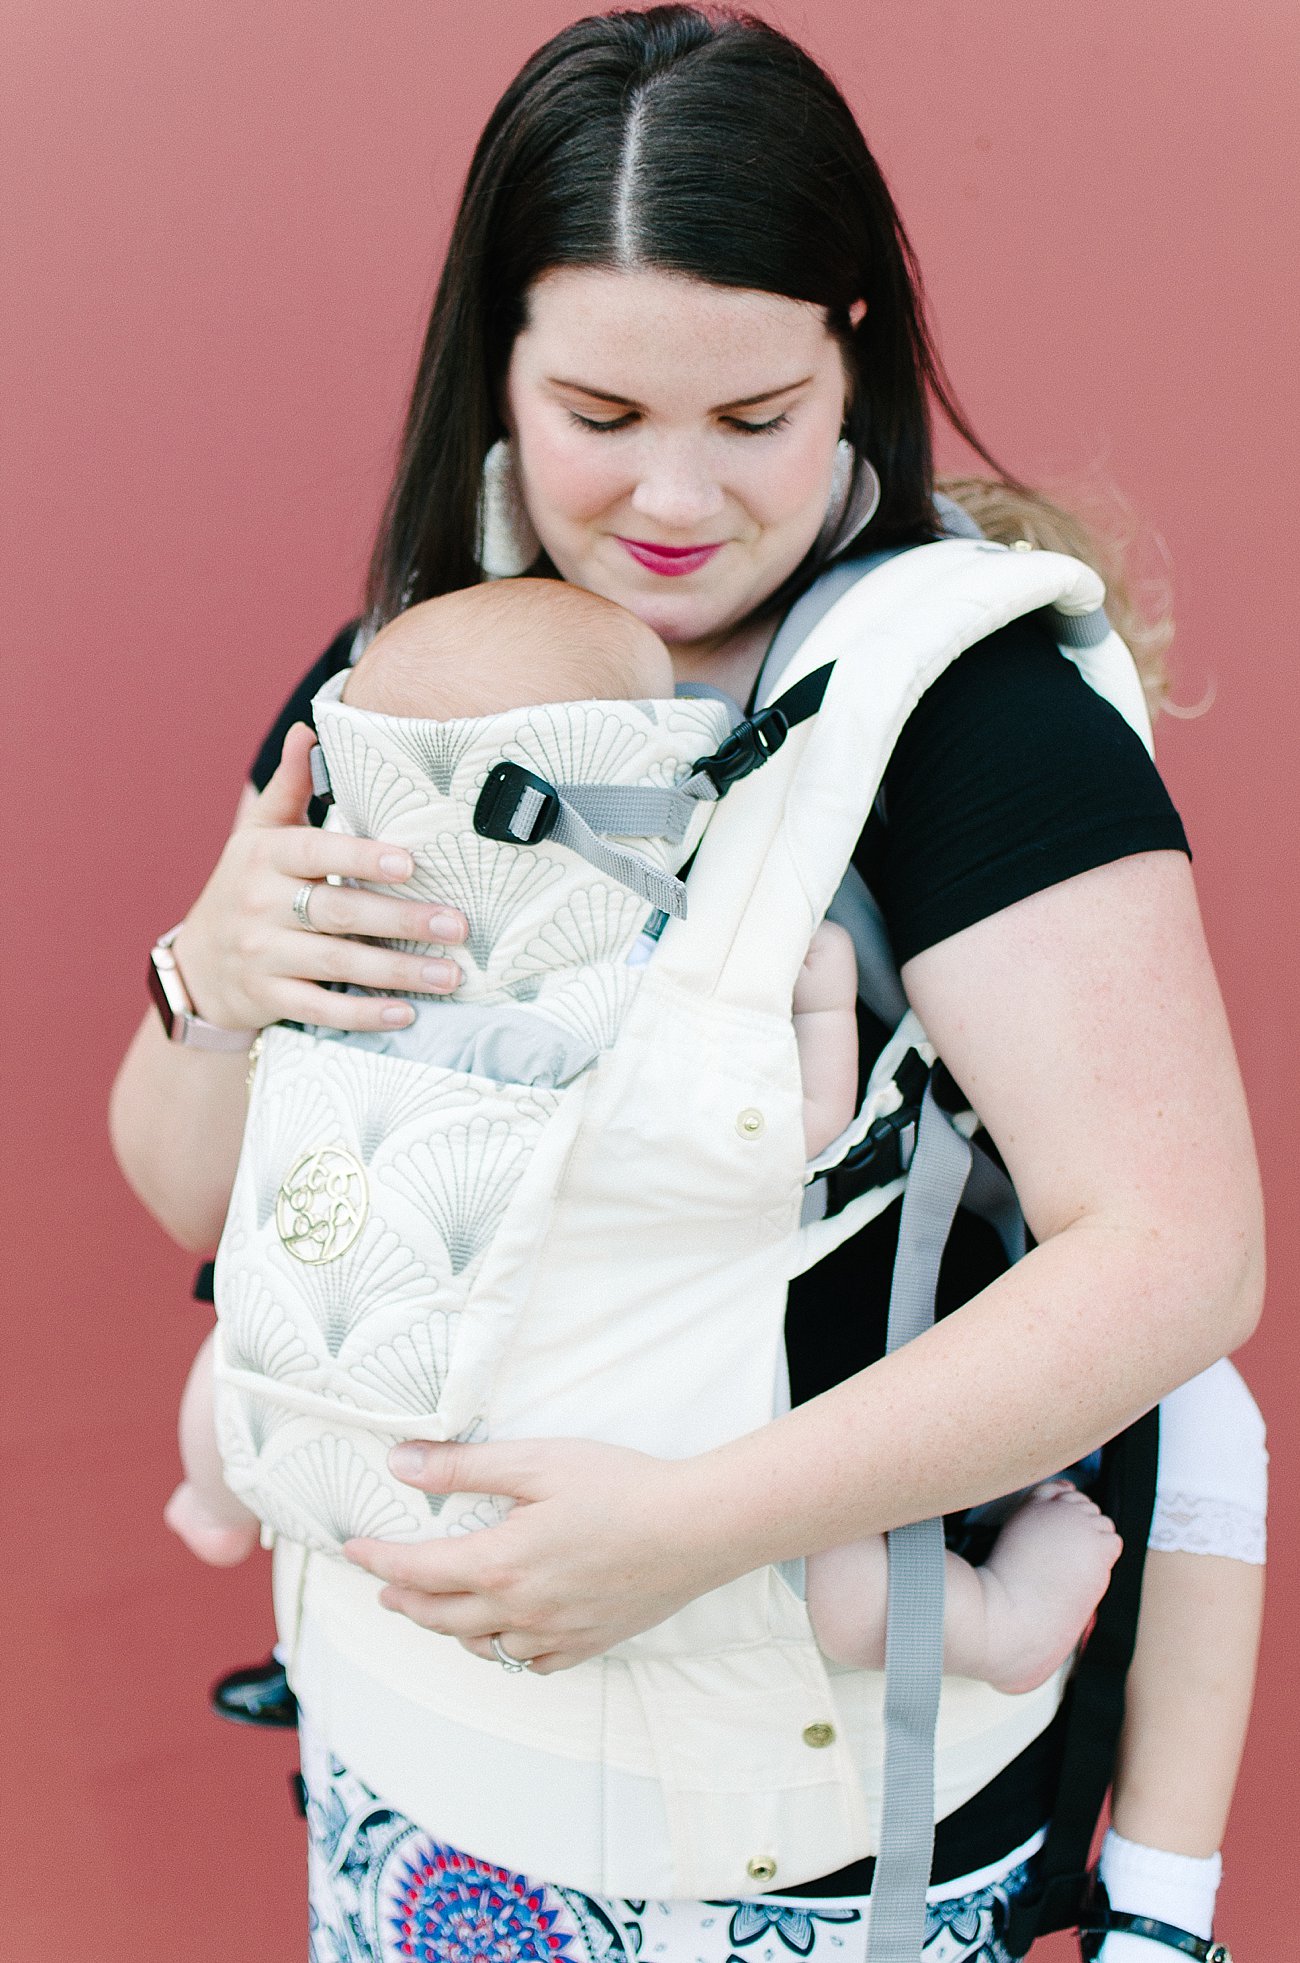 with Lillebaby Complete & CarryOn Baby Carriers #babywearing #tandemwearing #toddlerwearing (10)